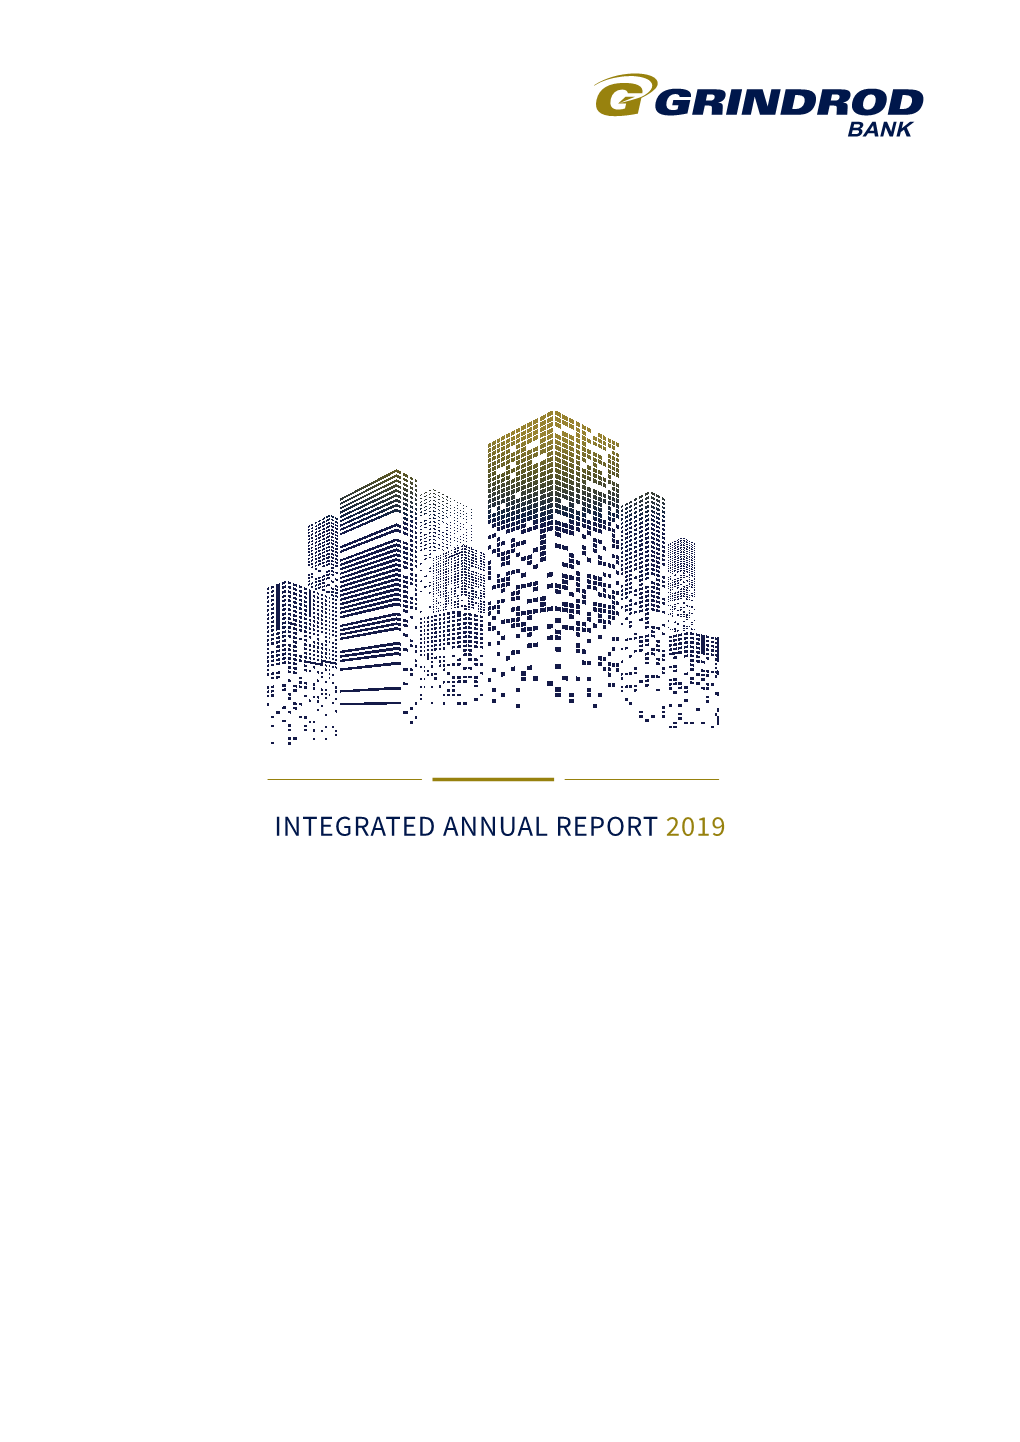 INTEGRATED ANNUAL REPORT 2019 Iv GRINDROD BANK LIMITED Integrated Annual Report 2019 WELCOME to the GRINDROD BANK INTEGRATED ANNUAL REPORT